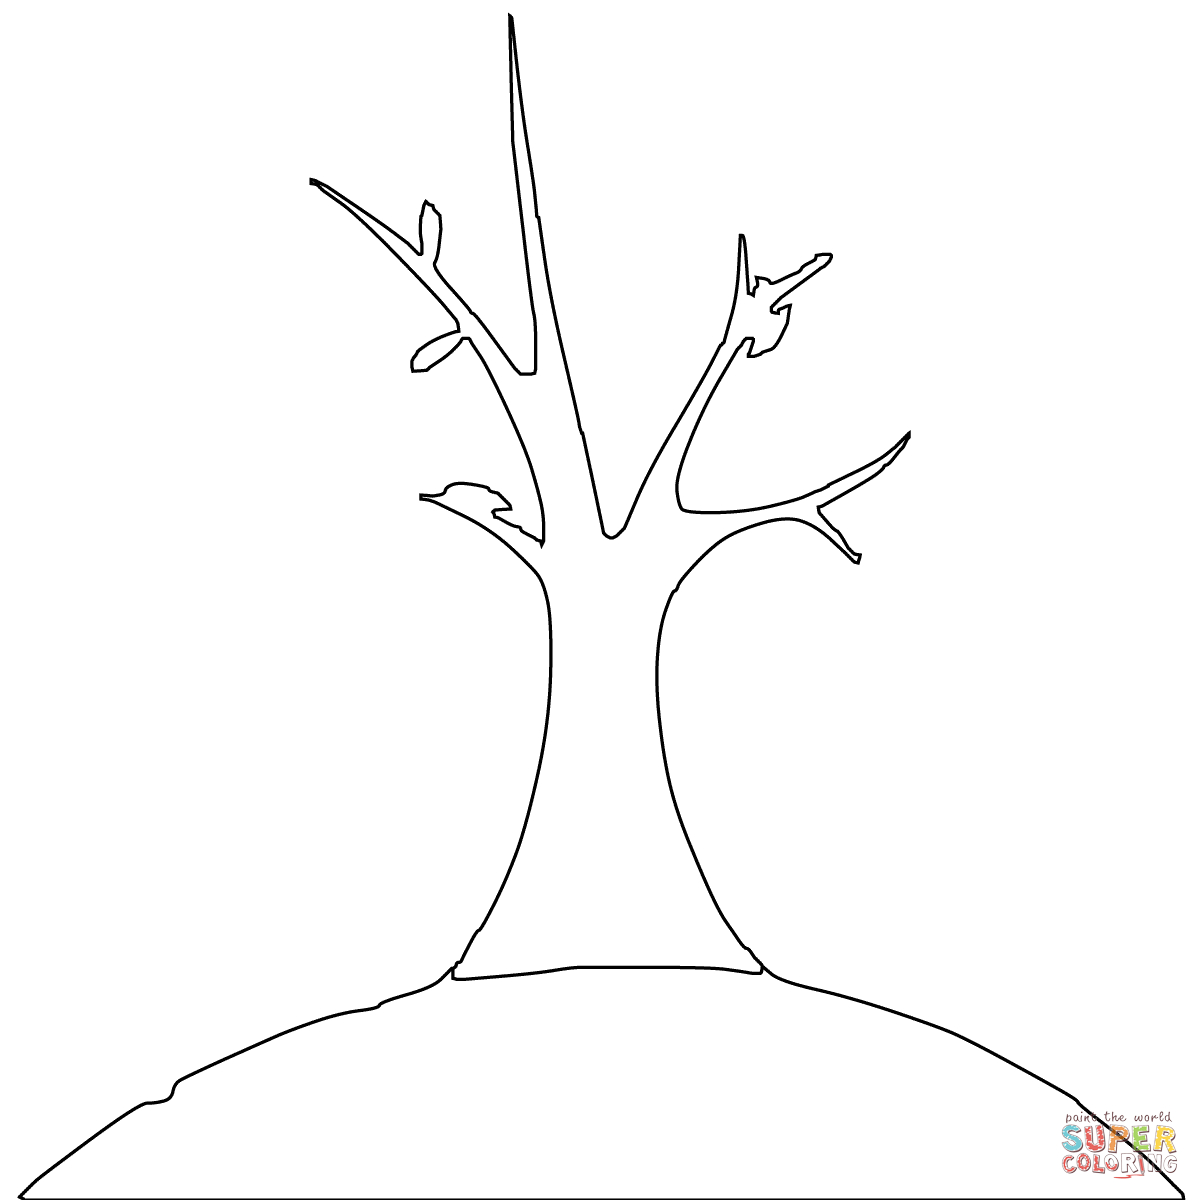 Bare Trees Coloring Pages | Free Printable Pictures - Coloring Home - Tree Coloring Pages Free Printable